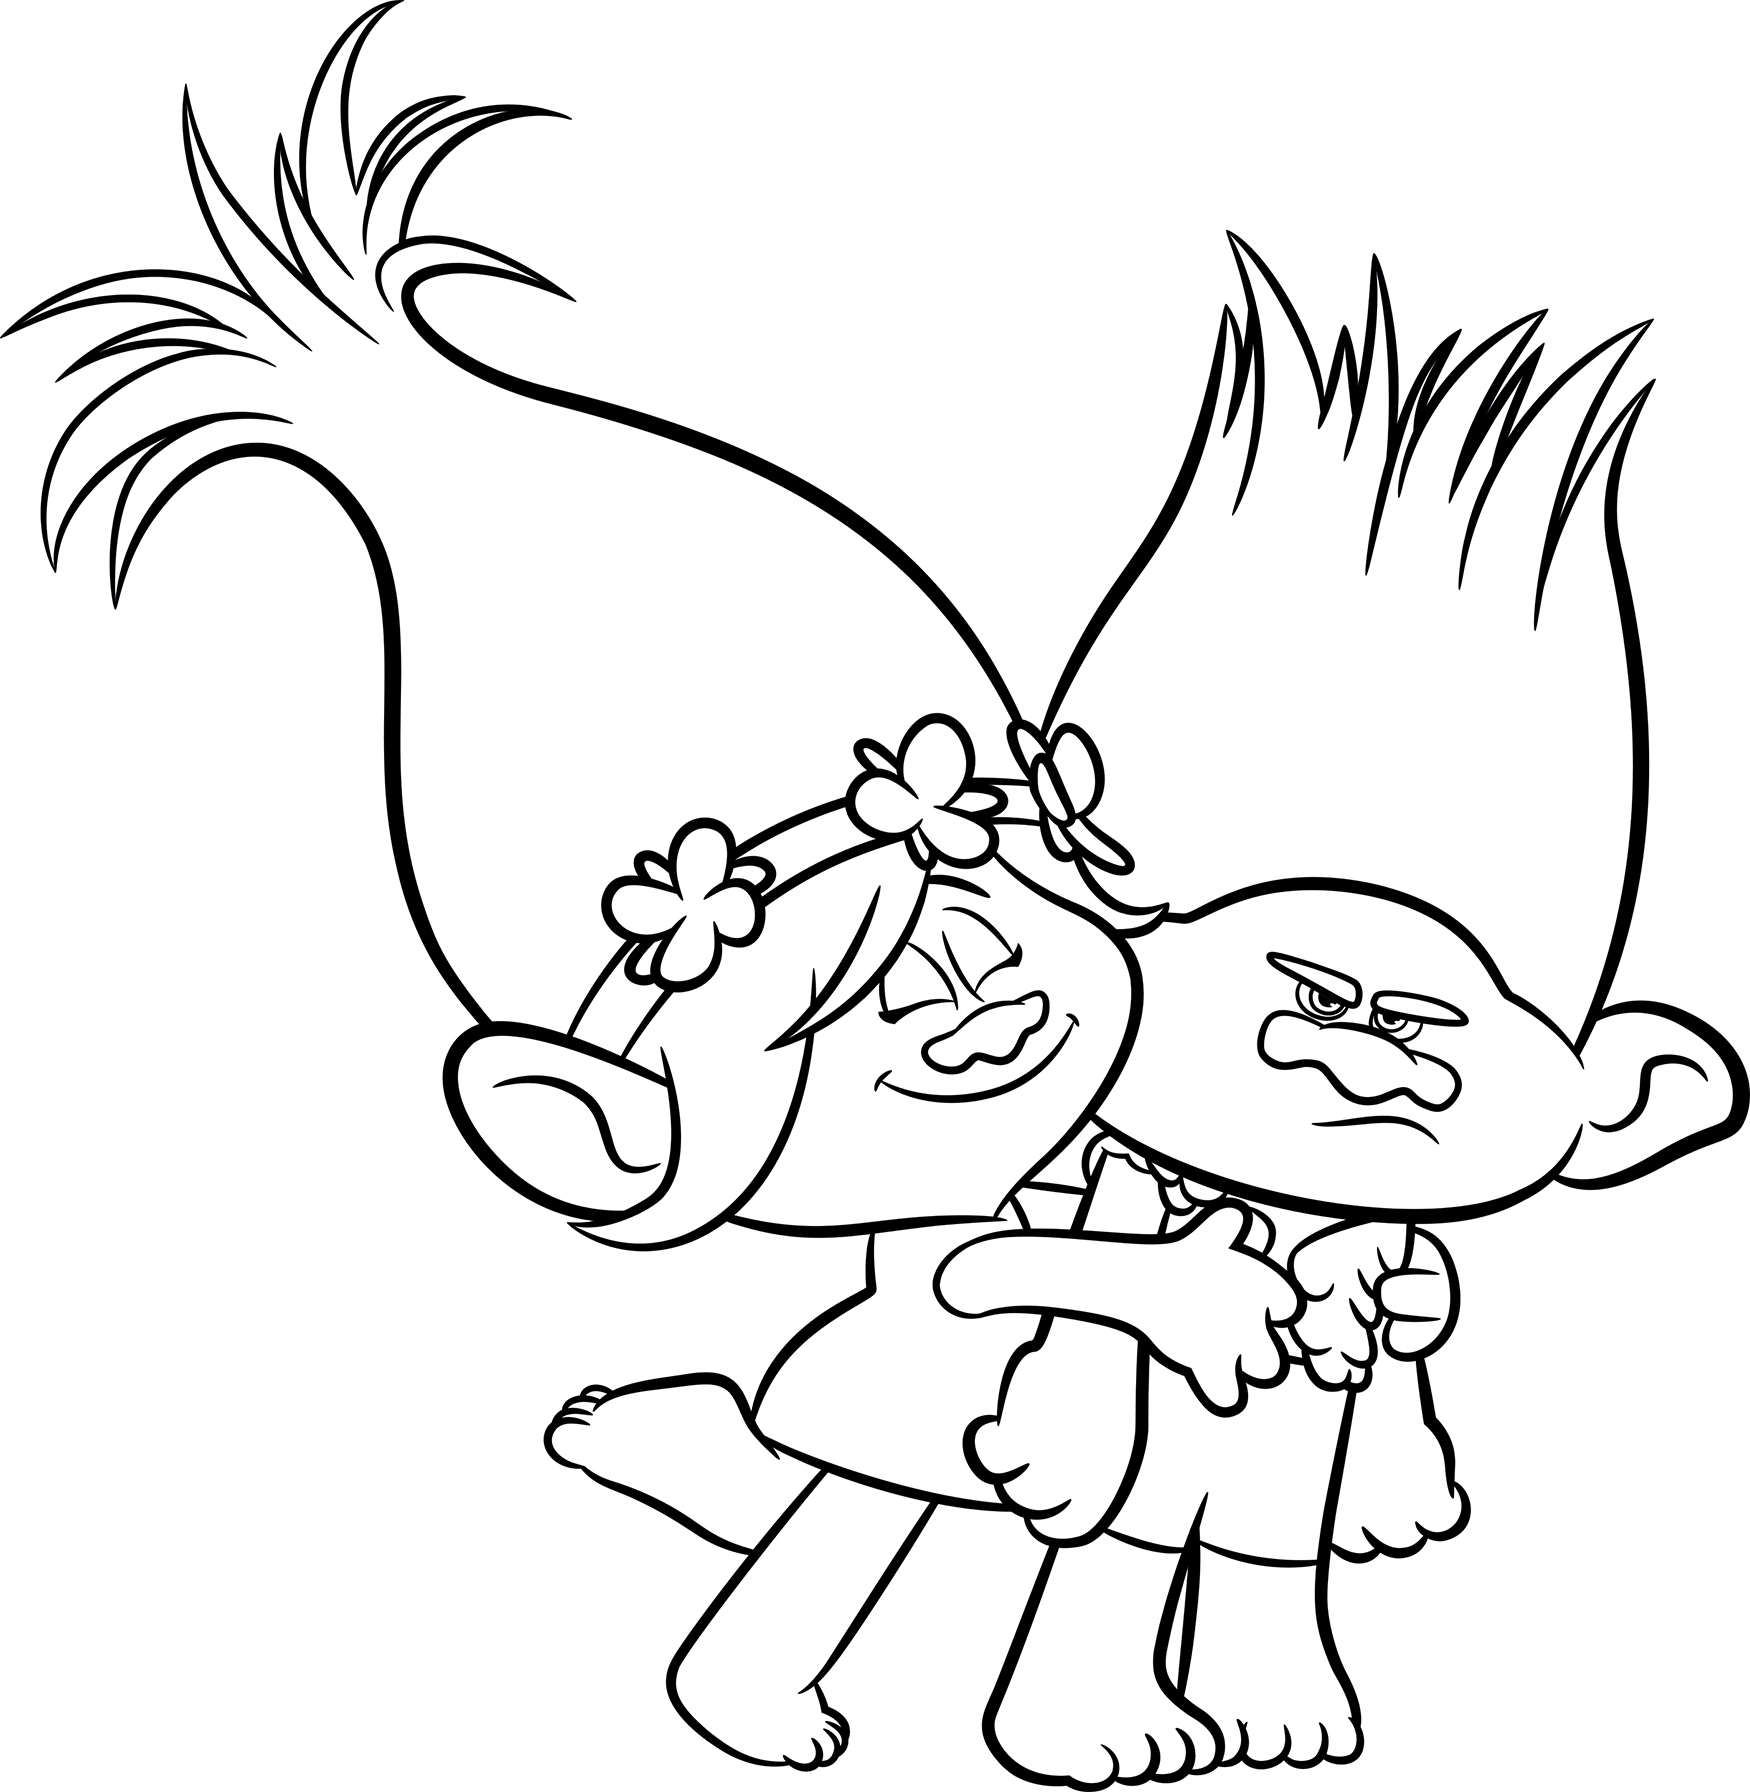 trolls-dreamworks-coloring-sheet-coloring-pages